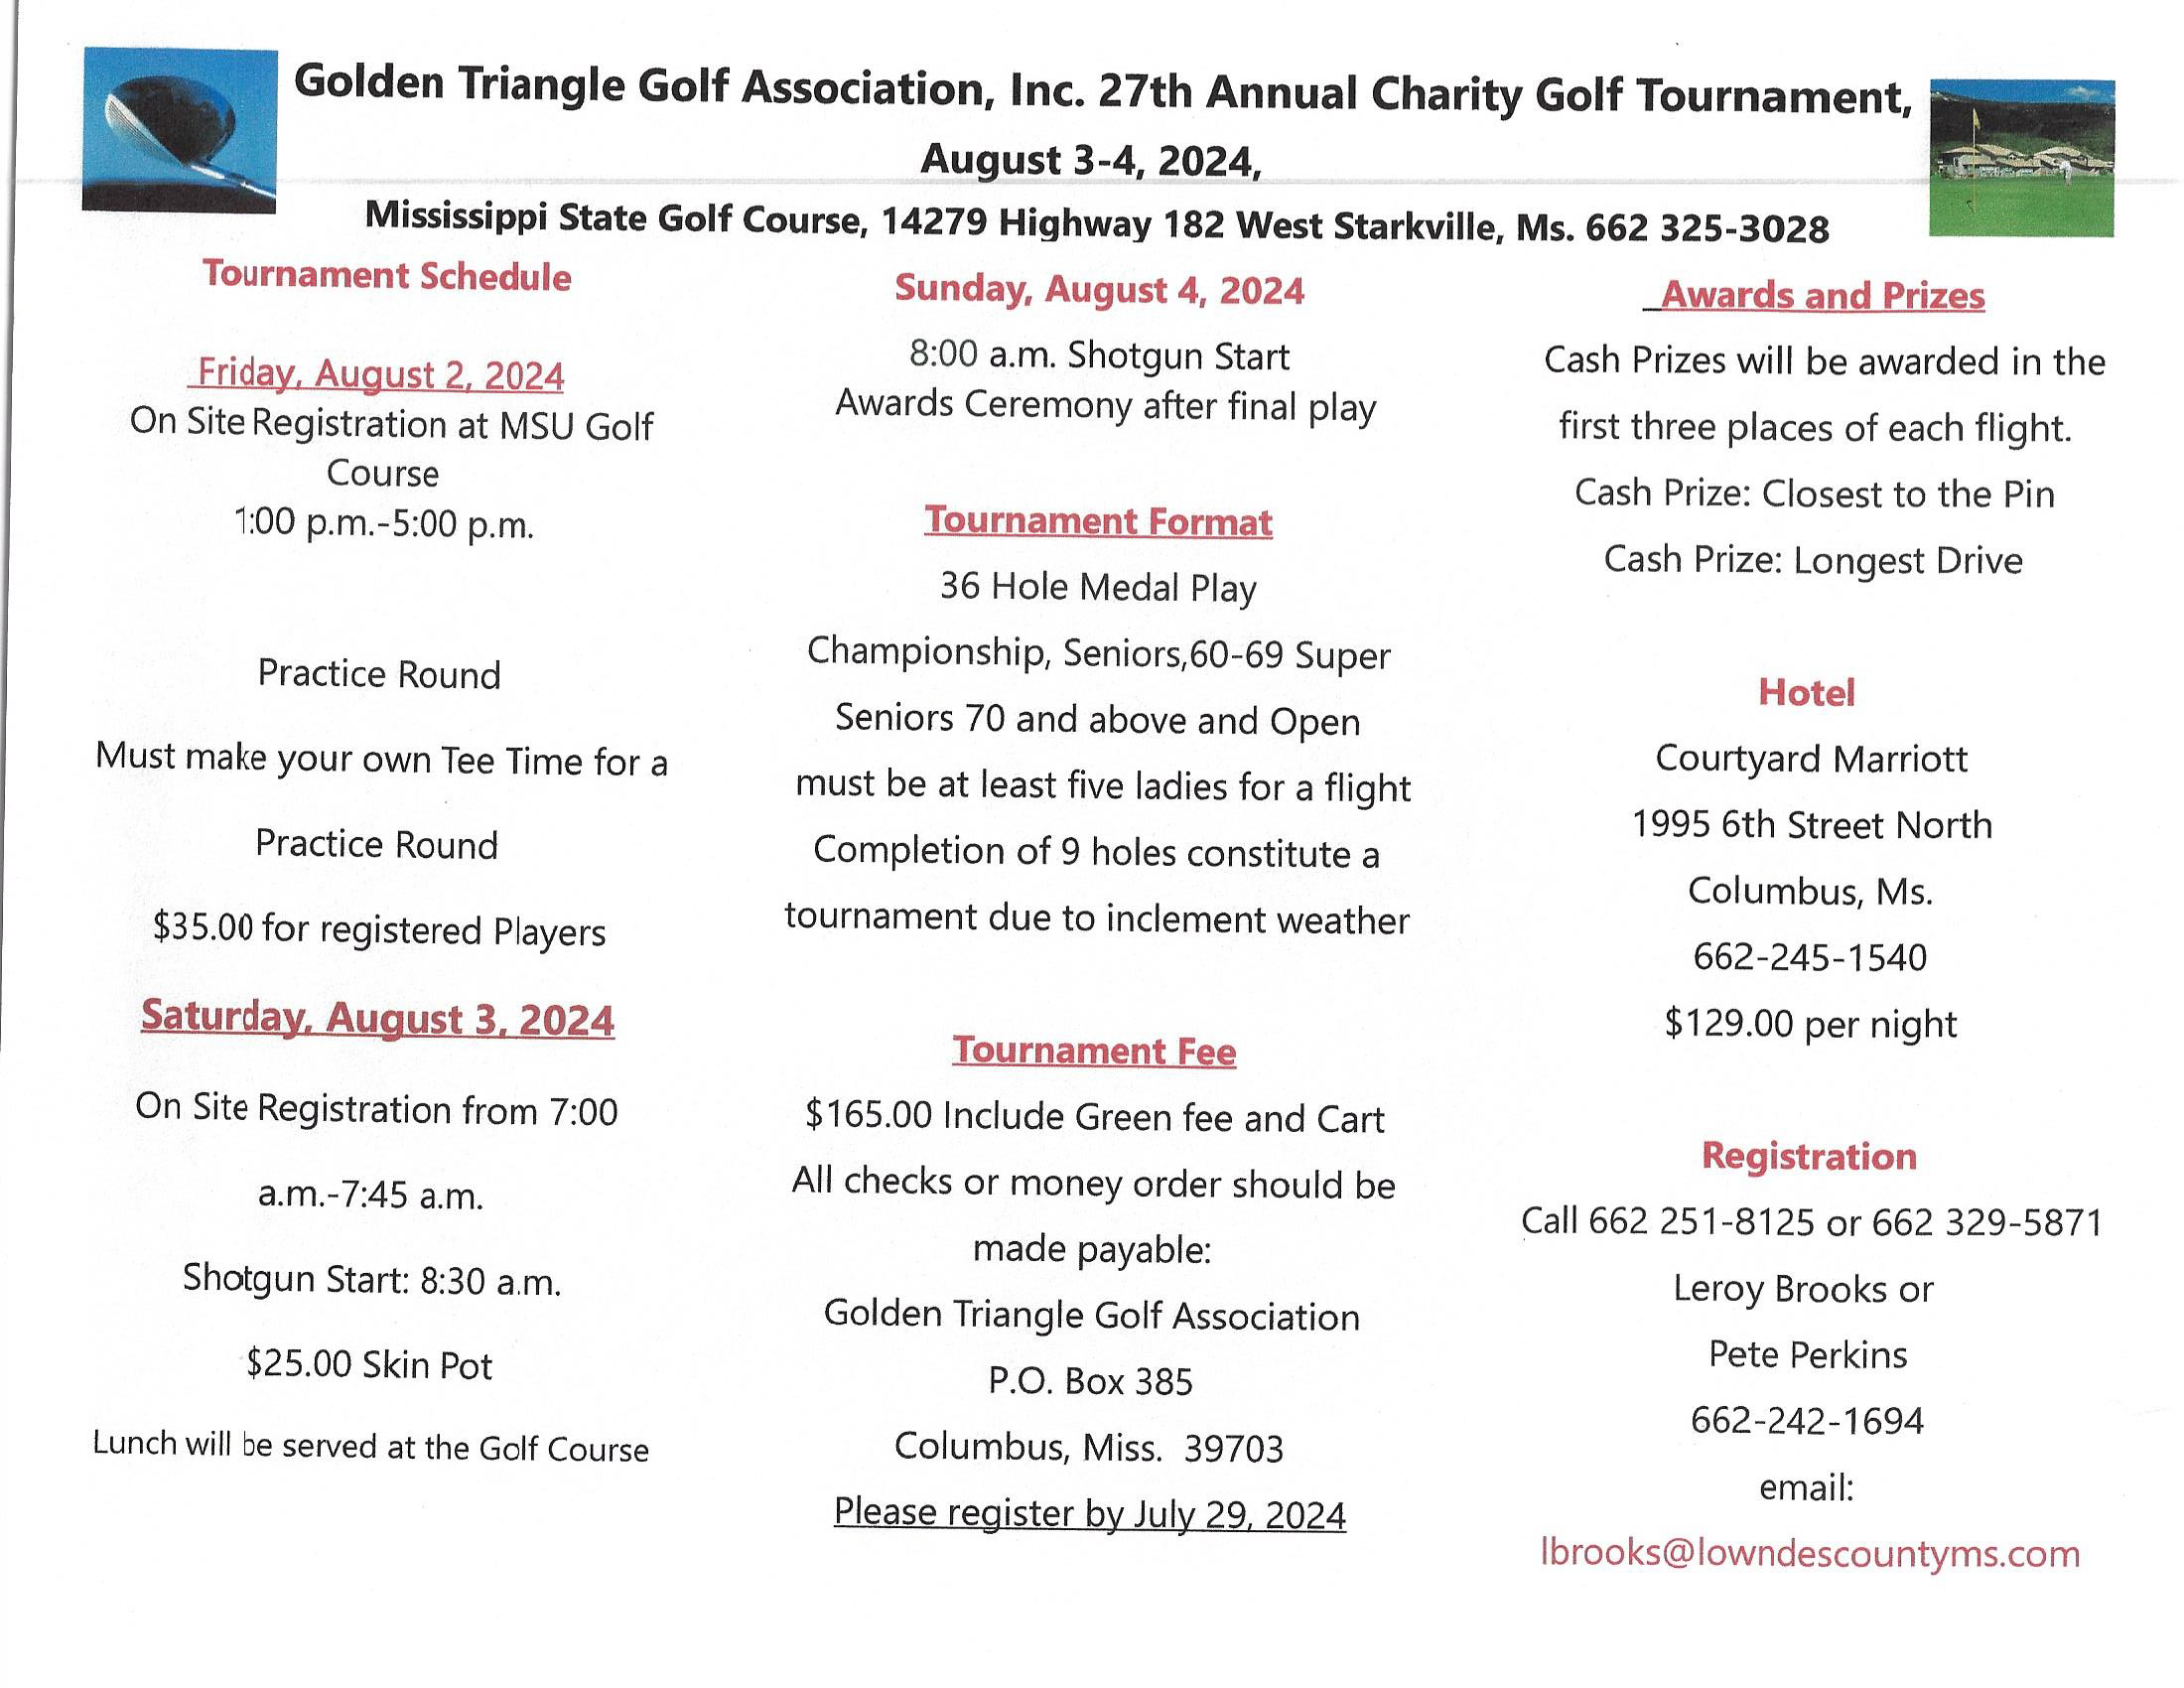 Welcome to The Golden Triangle Golf Association